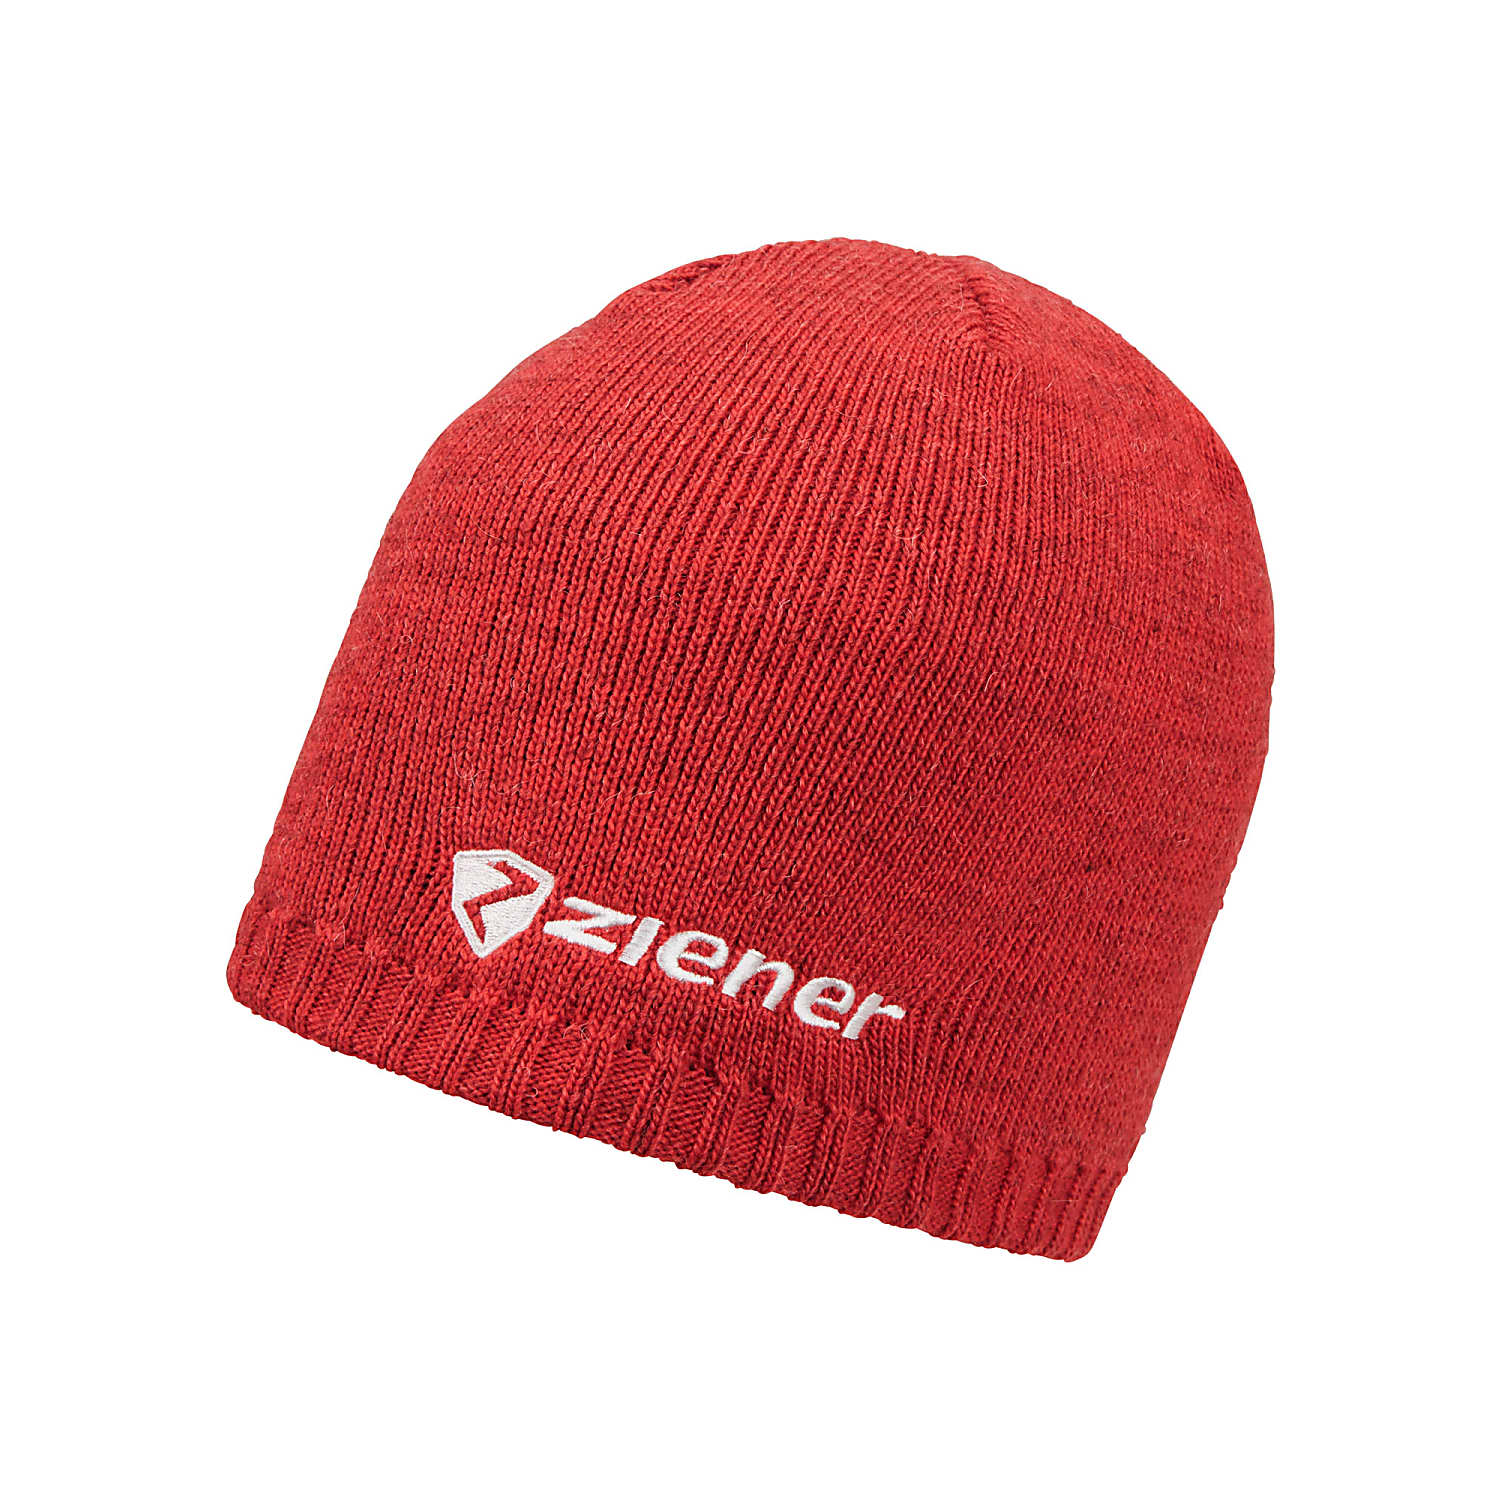 Ziener IRUNO HAT, Red - and Fast shipping cheap